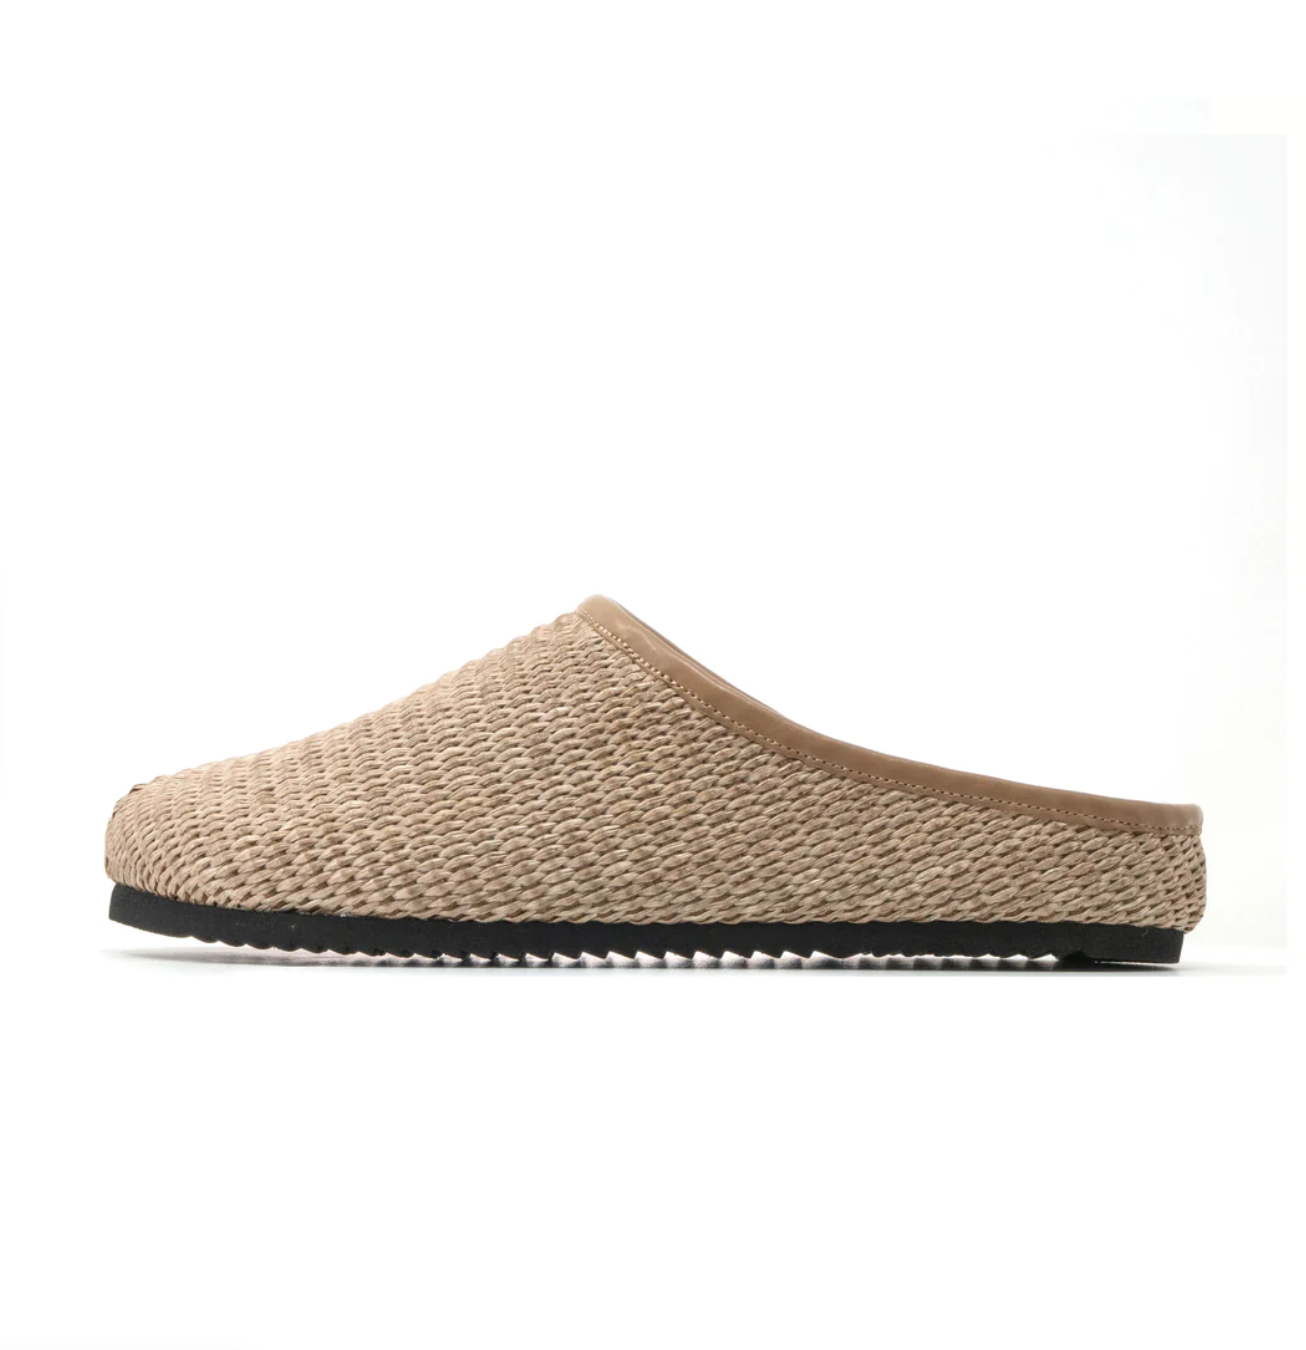 A profile view of a Roam the Raffia Clog slipper with a flat sole, reminiscent of Scottsdale Arizona aesthetics, on a white background.